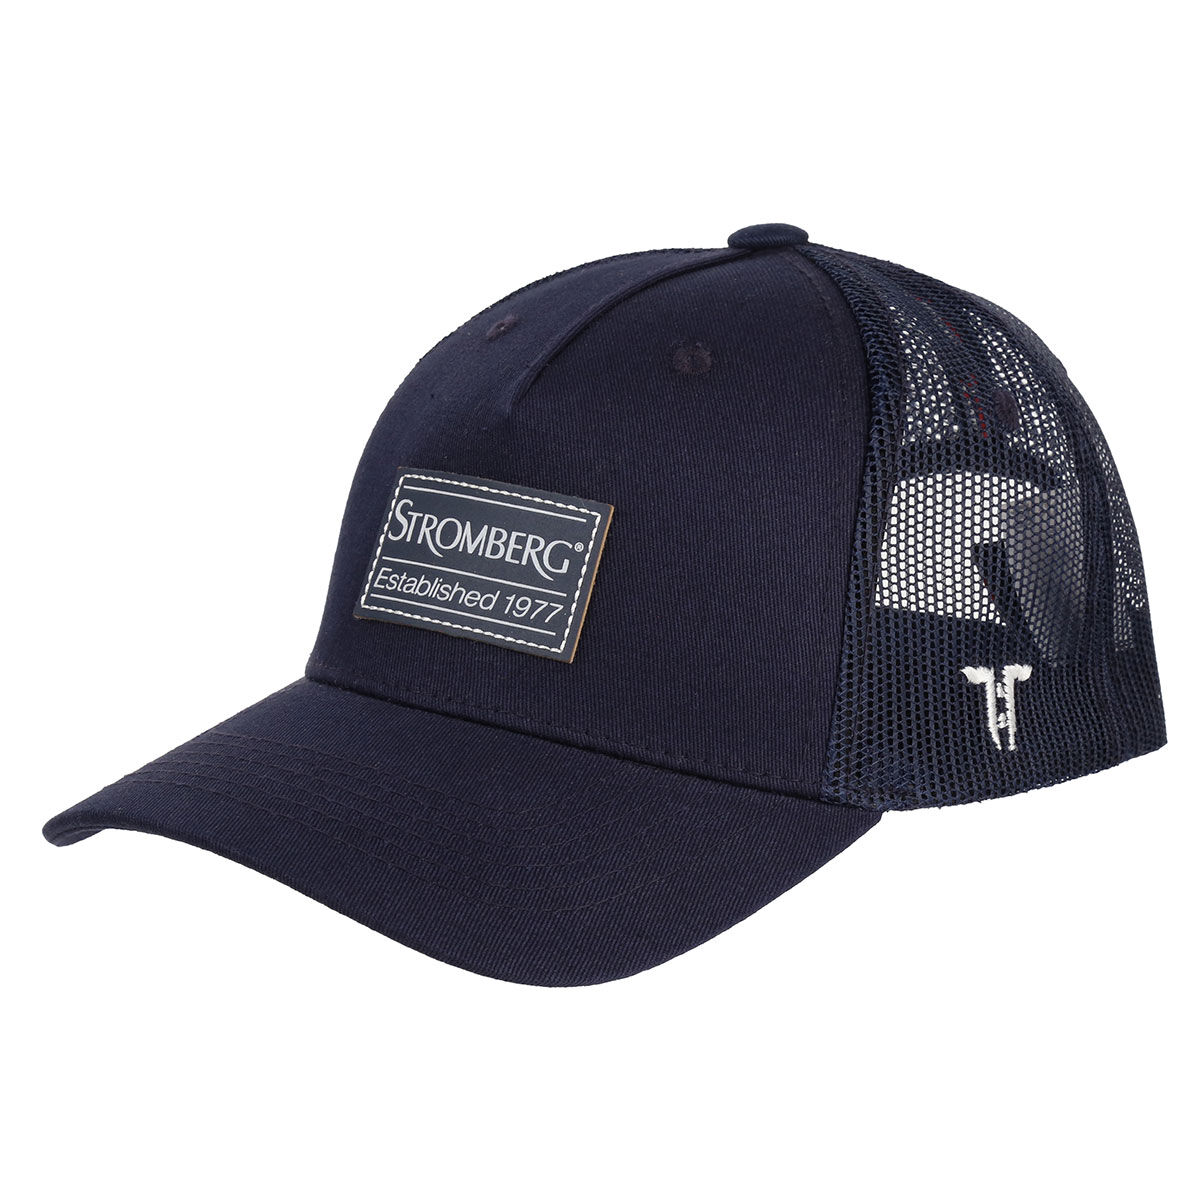 Stromberg Navy Blue and White Comfortable Chambray Trucker Golf Cap | American Golf, One Size